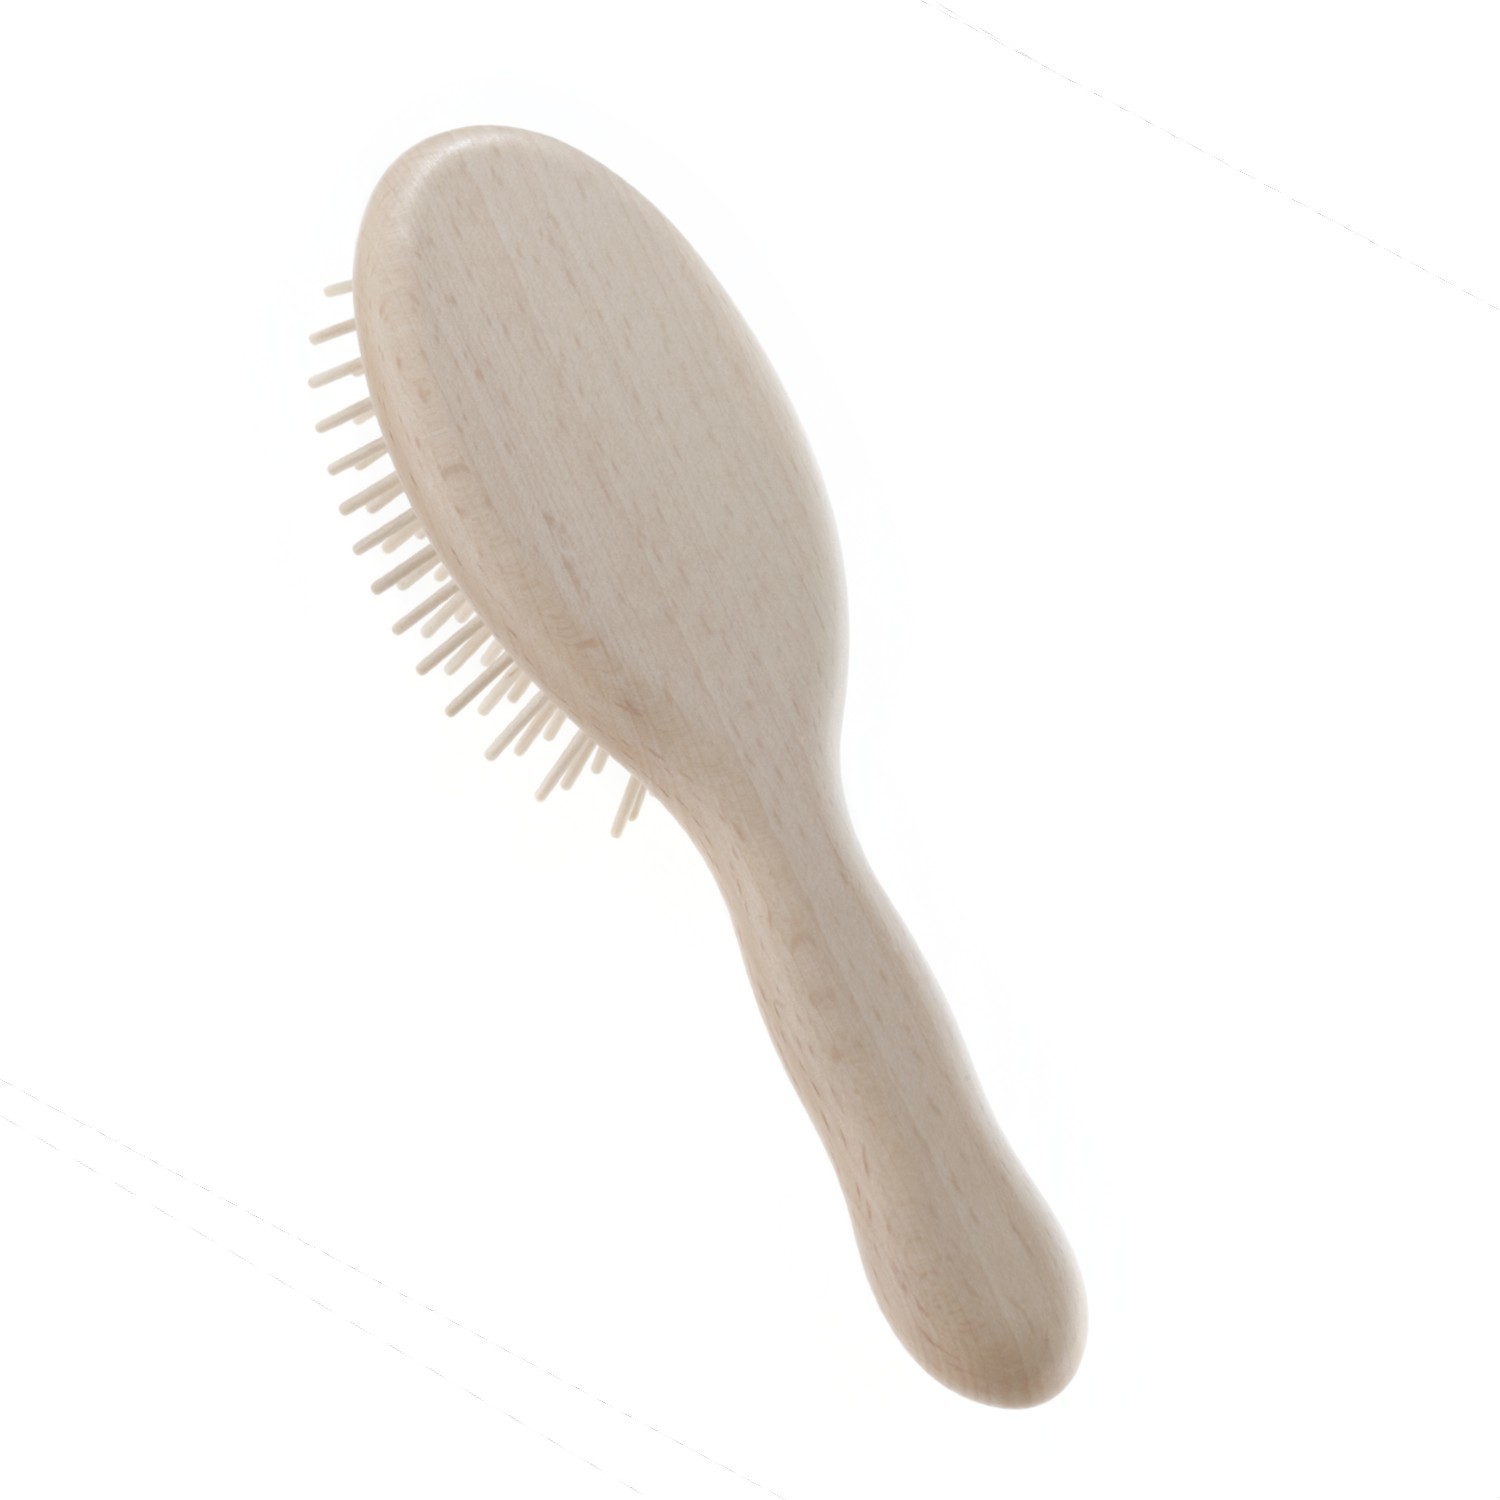 ACCA KAPPA Beech Wood Pneumatic Brush with Wooden Pins